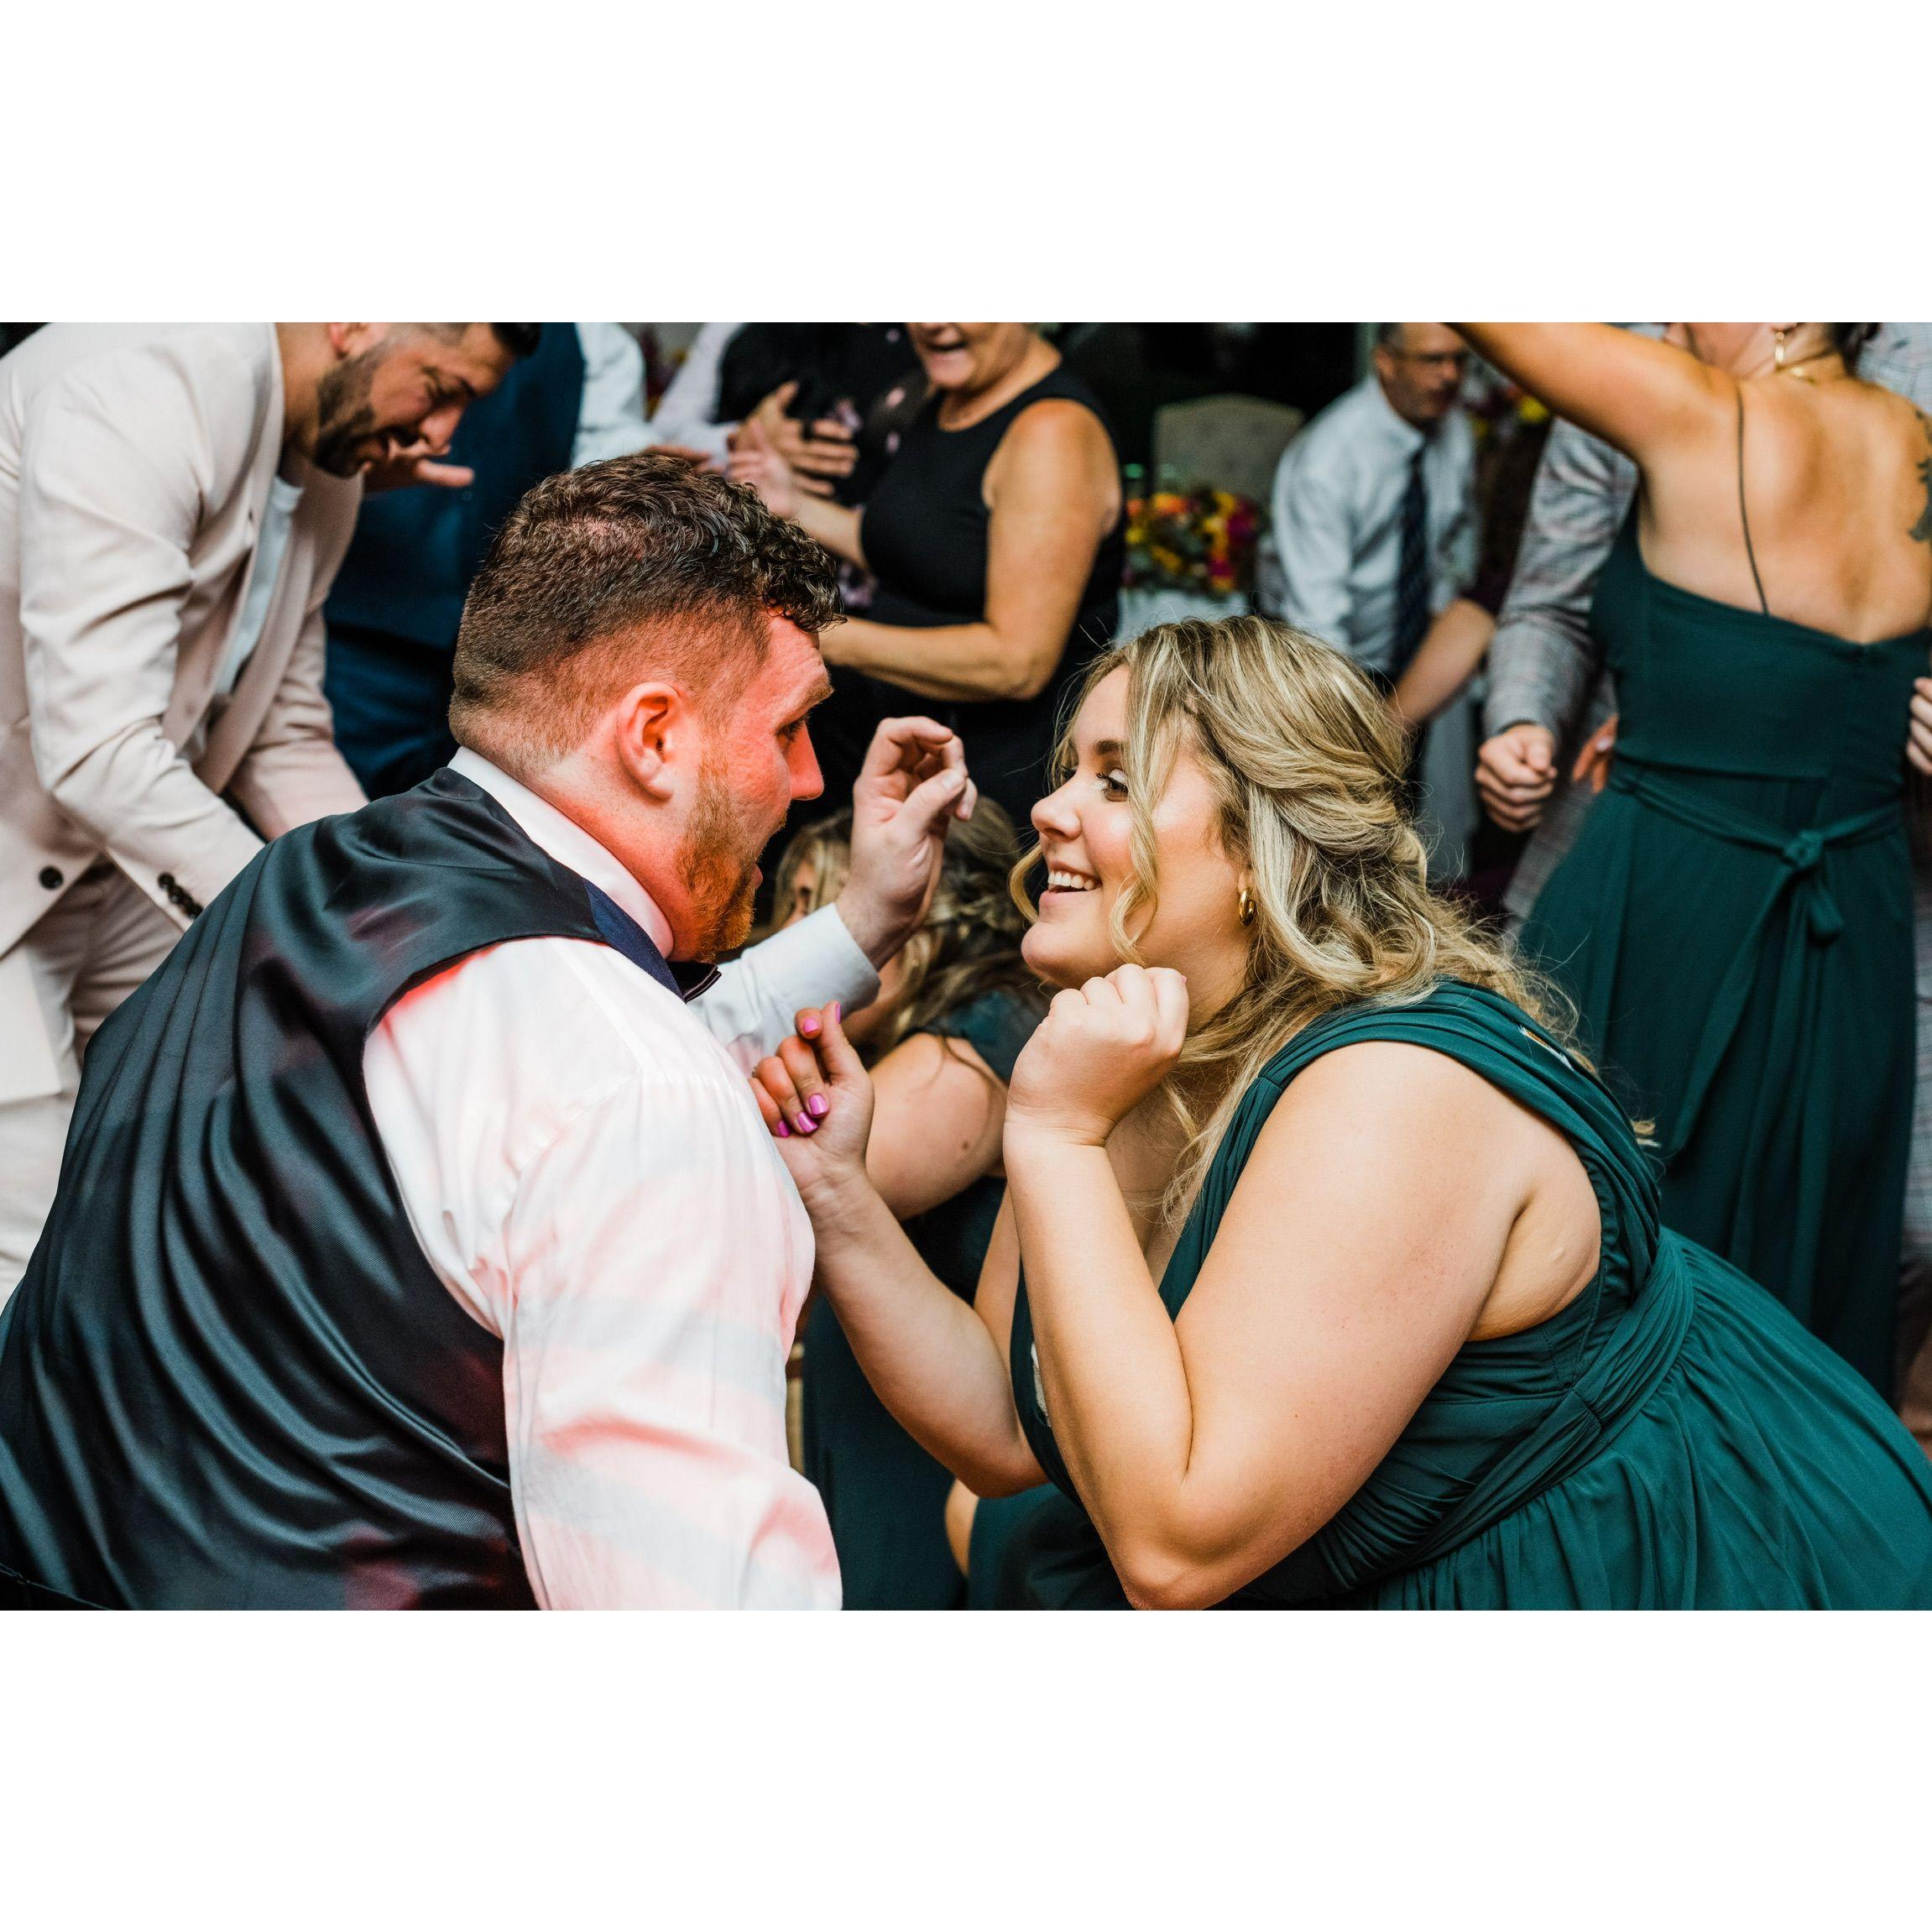 Dancing at our best friend's wedding